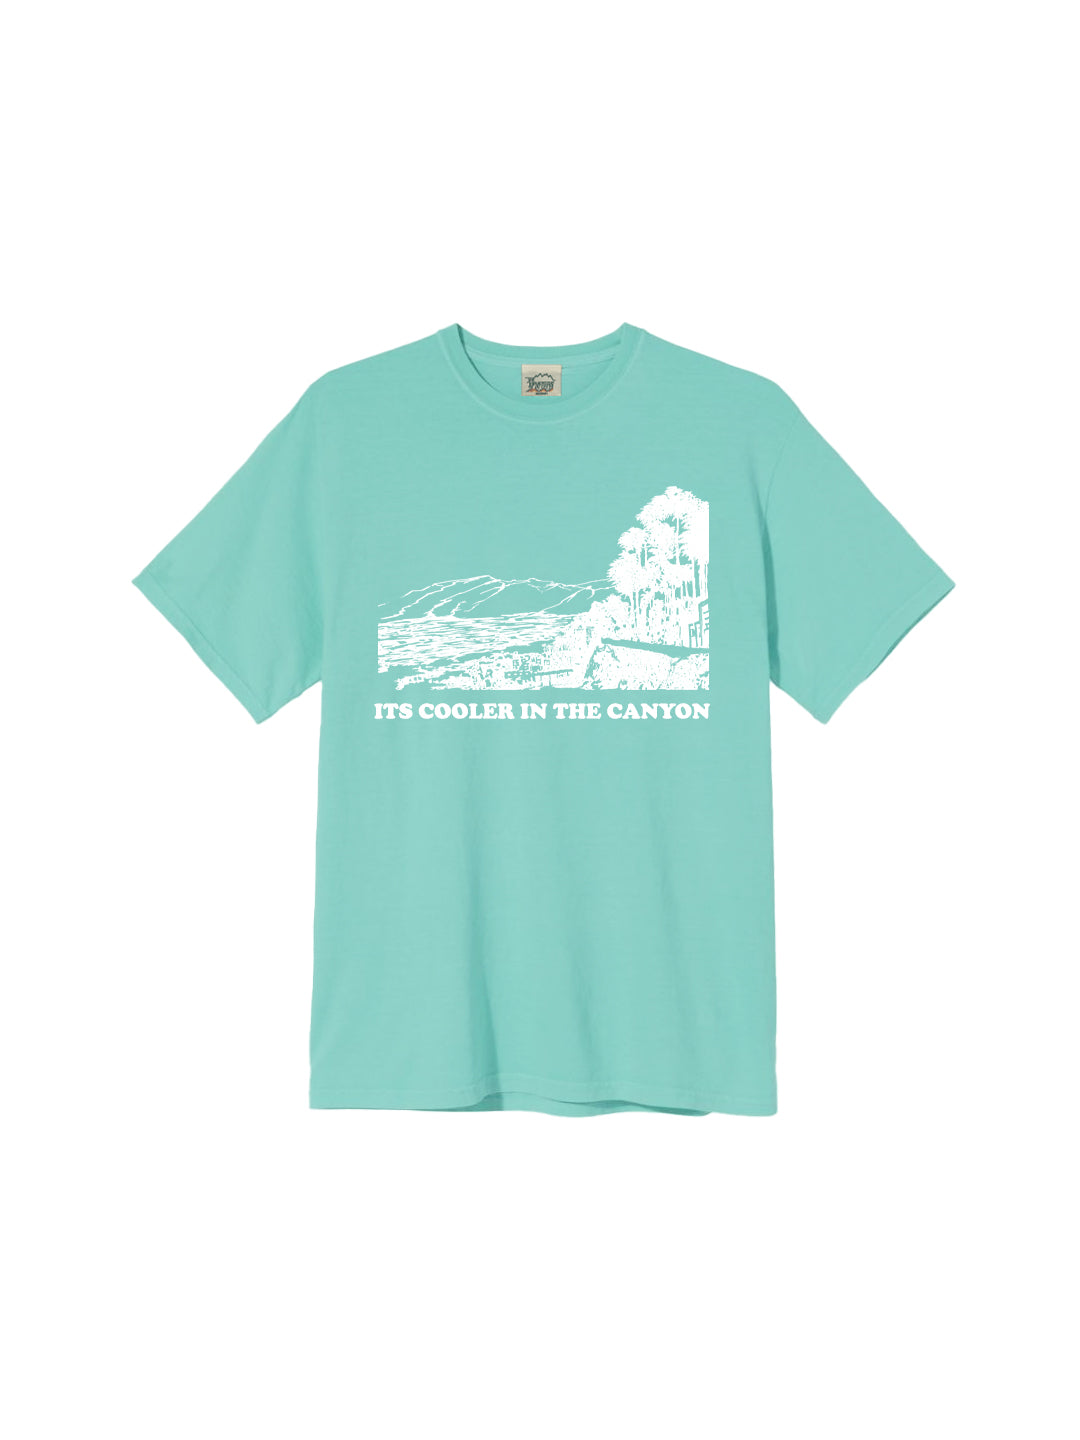 Cooler in the Canyon Adult Tee in Mint